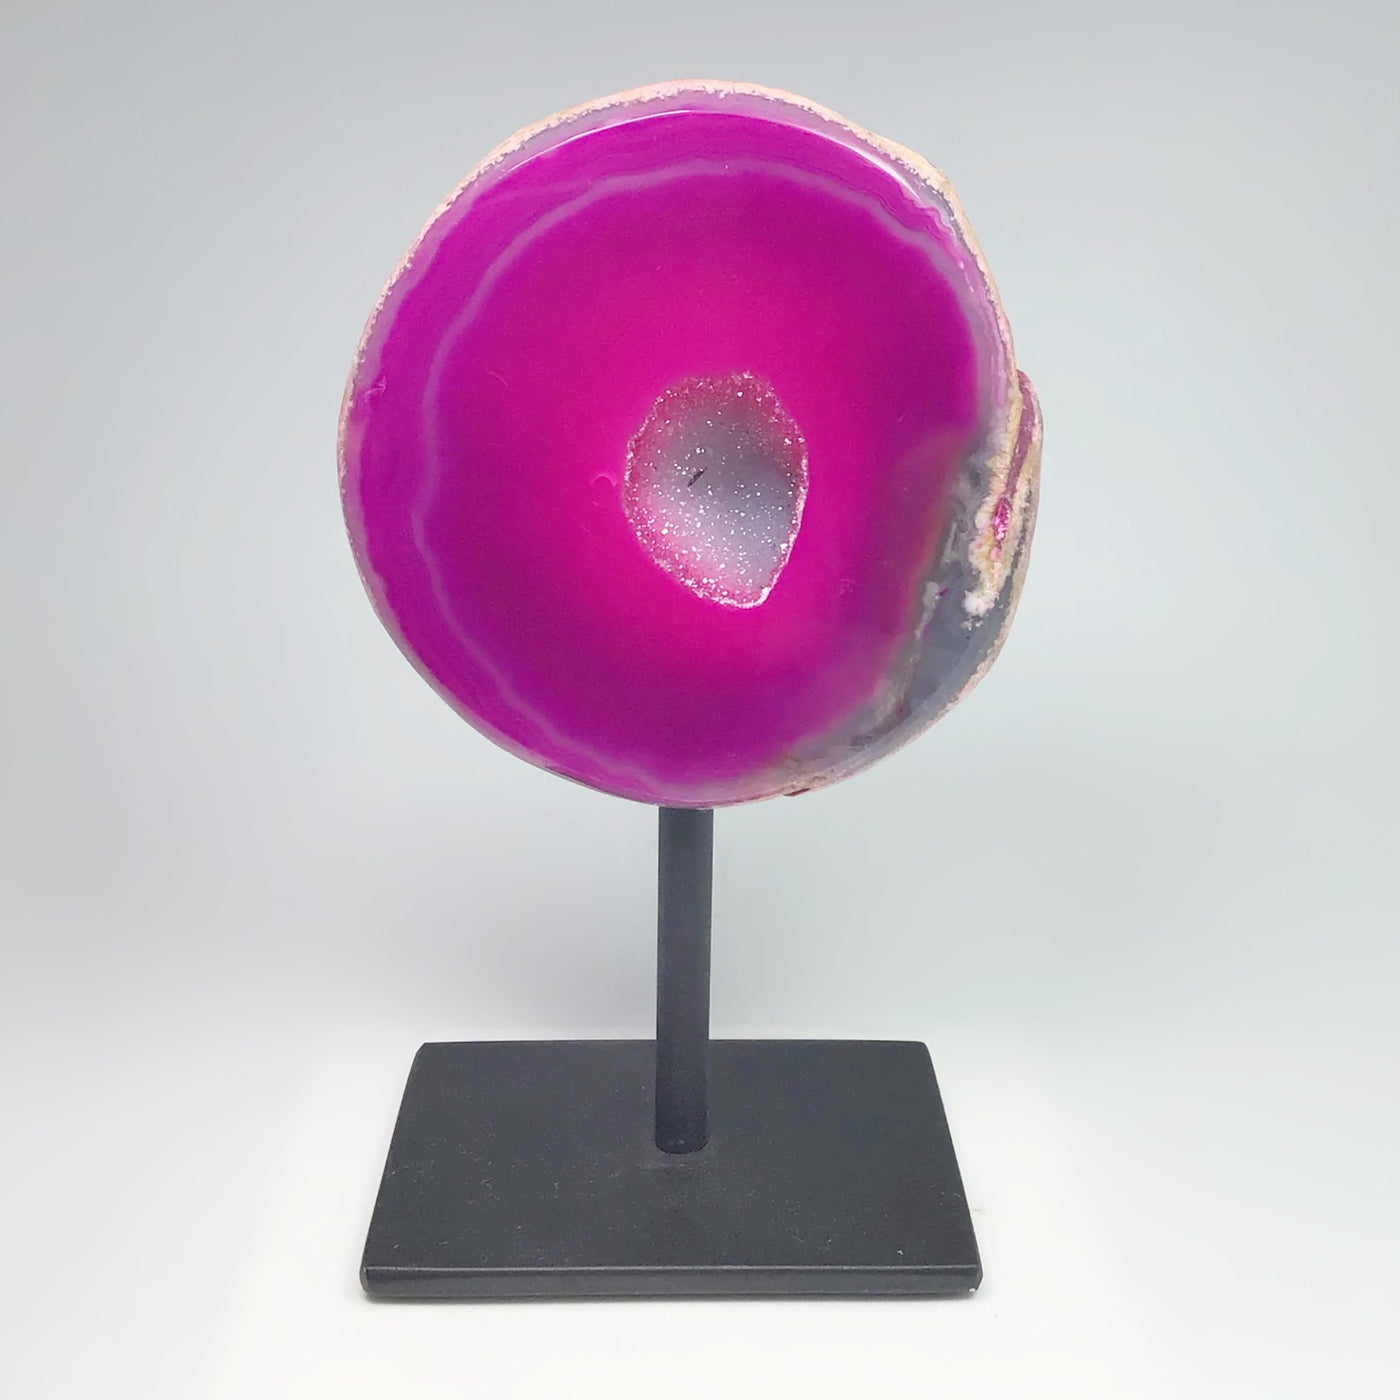 Pink Agate Geode on Stand